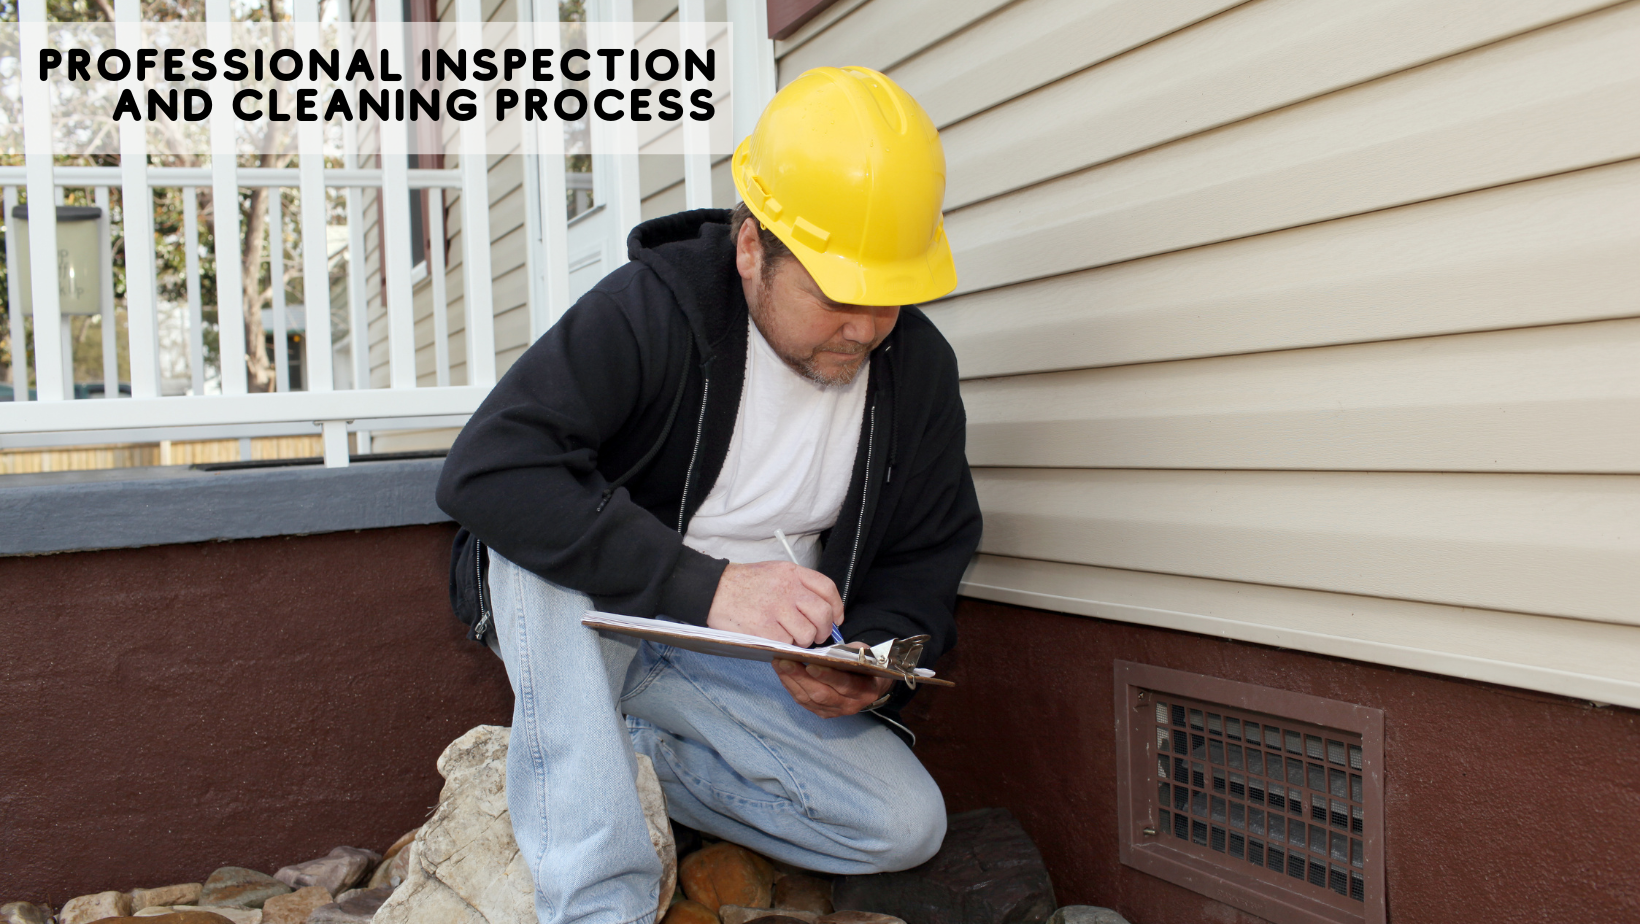 Professional inspection and cleaning process